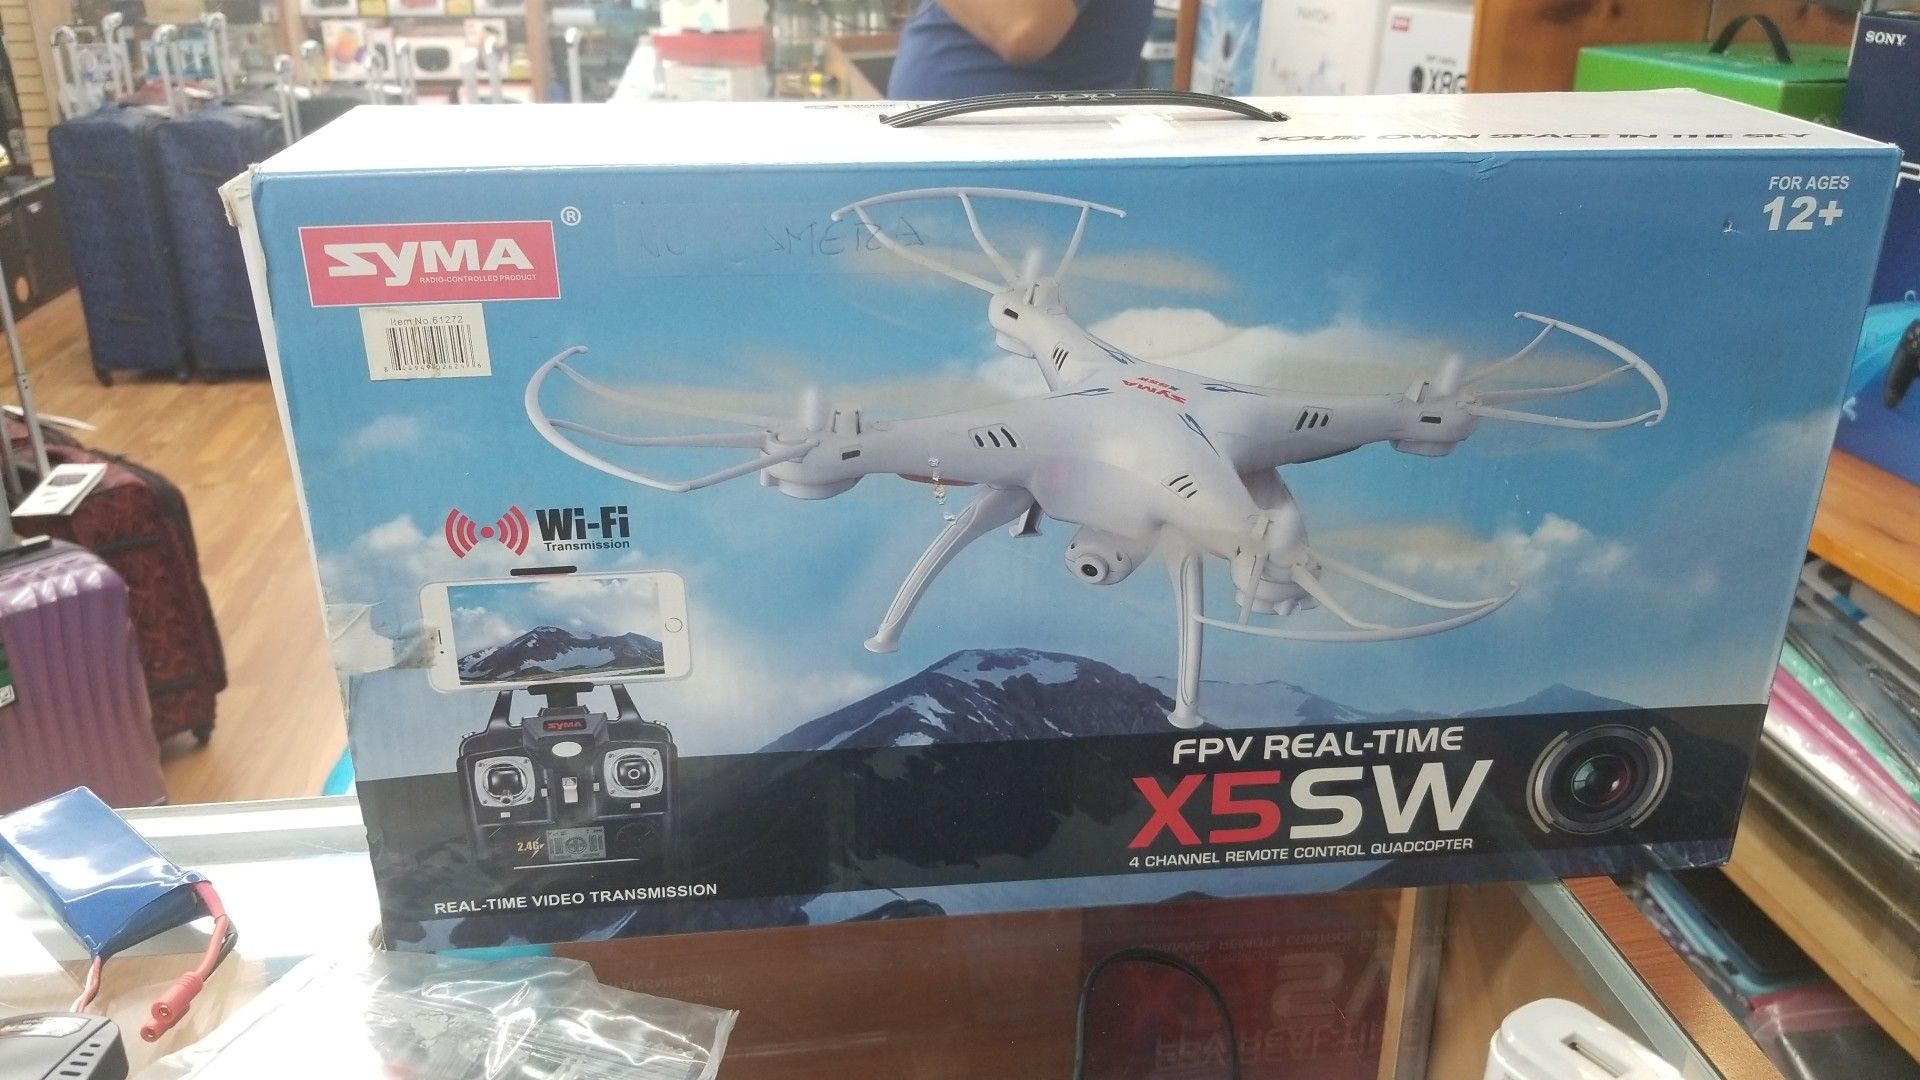 SYMA DRONE X5SW FOR SALE WITH CAMERA FOR SALE!!!